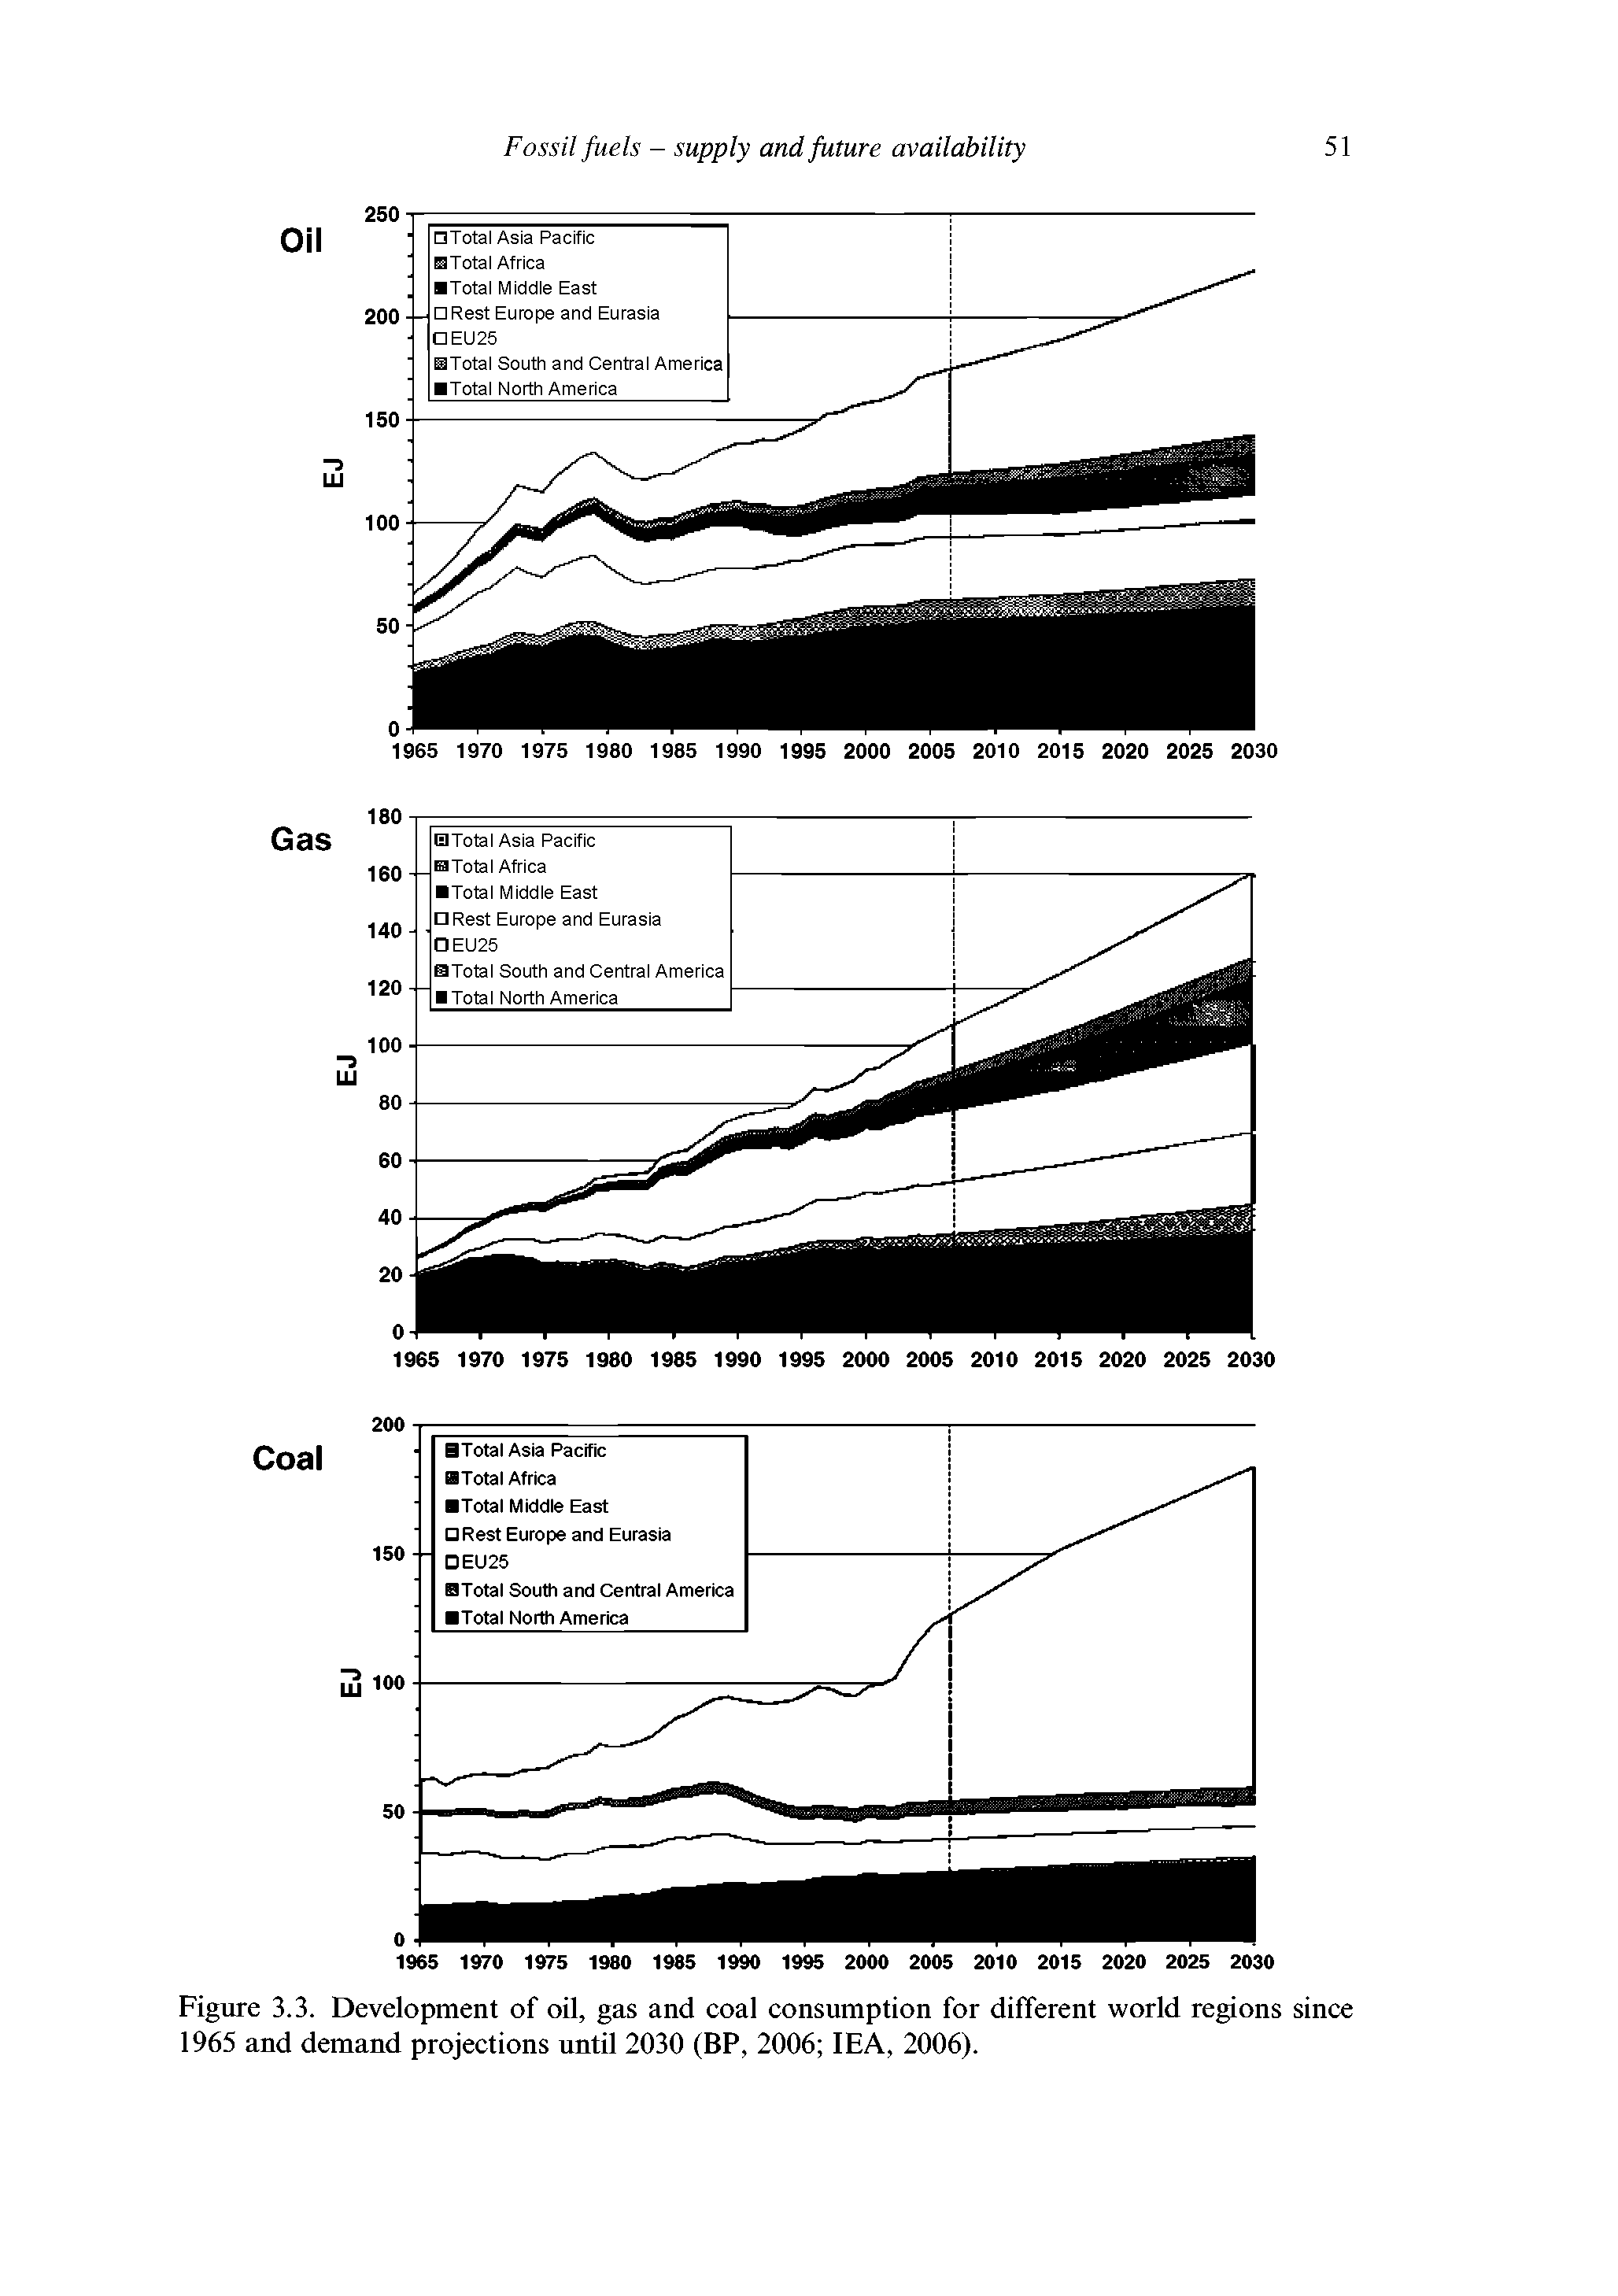 Figure 3.3. Development of oil, gas and coal consumption for different world regions since 1965 and demand projections until 2030 (BP, 2006 IEA, 2006).